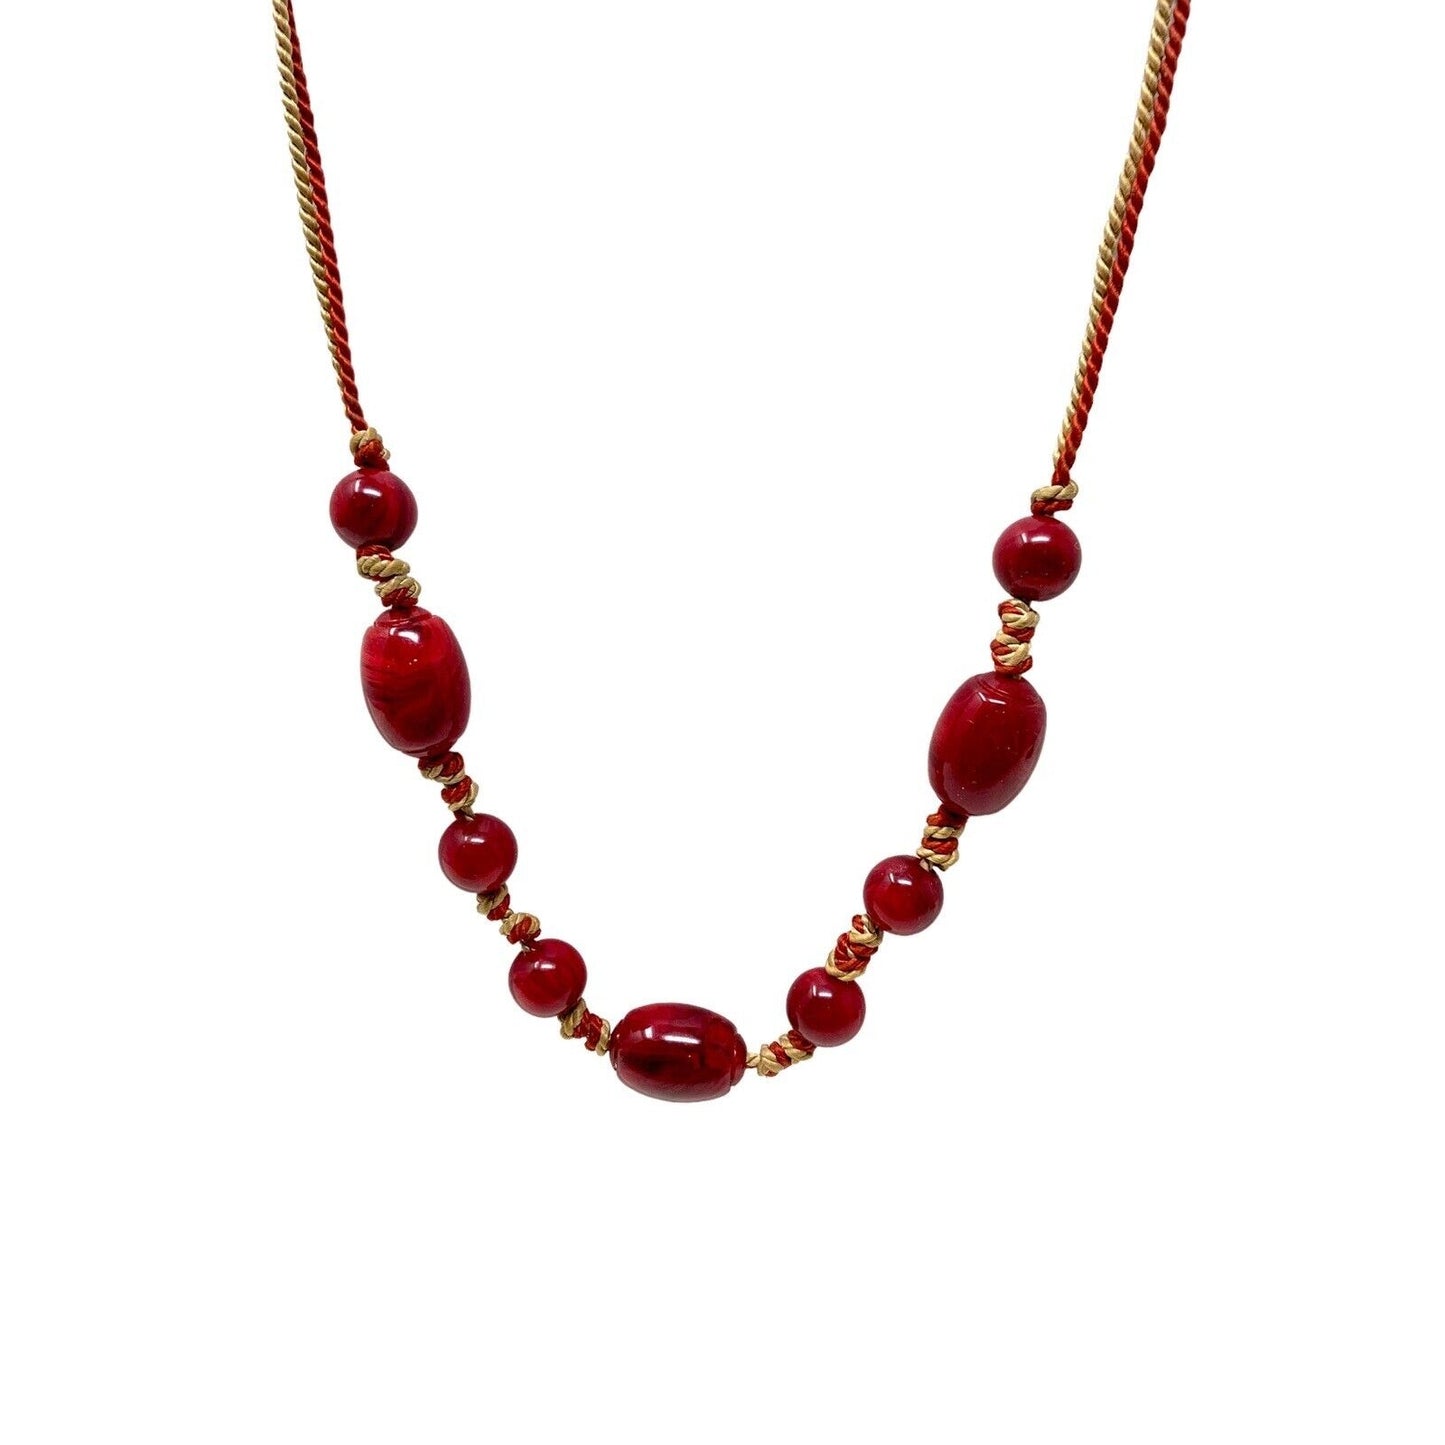 Red Wood Beads on a Corded Necklace